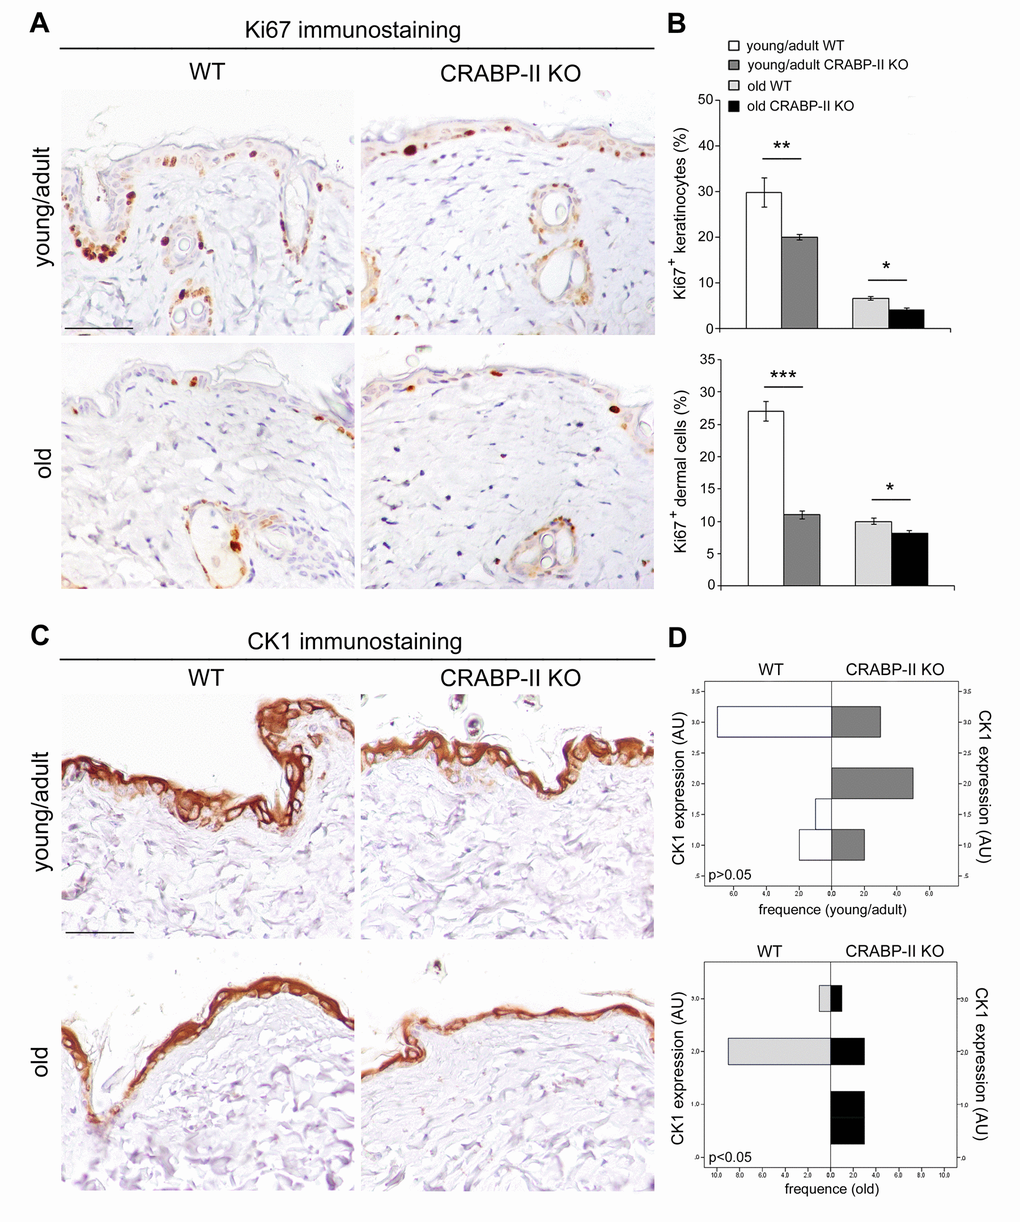 Epidermal proliferation and differentiation are reduced in CRABP-IIknock-out mice. (A) Representative images of Ki67 immunostaining of young/adult and old wild-type (WT) and CRABP-II knock-out (KO) skin. Scale bar: 50µm. (B) Bar graphs show semiquantitative evaluation of Ki67 positive epidermal keratinocytes and dermal cells (n=10 young/adult and n=10 old WT, n=10 young/adult and n=10 old CRABP-II KO). Values are mean ± SEM. t-Test: *, ** and *** indicate pppC) Representative images of cytokeratin 1 (CK1) immunostaining of young/adult and old WT and CRABP-II KO skin. Scale bar: 50µm. (D) Bar graphs showing the semiquantitative CK1 evaluation (n=10 young/adult and n=10 old WT, n=10 young/adult and n=10 old CRABP-II KO). Mann-Whitney’s U-test. Abbreviation: AU, arbitrary units.